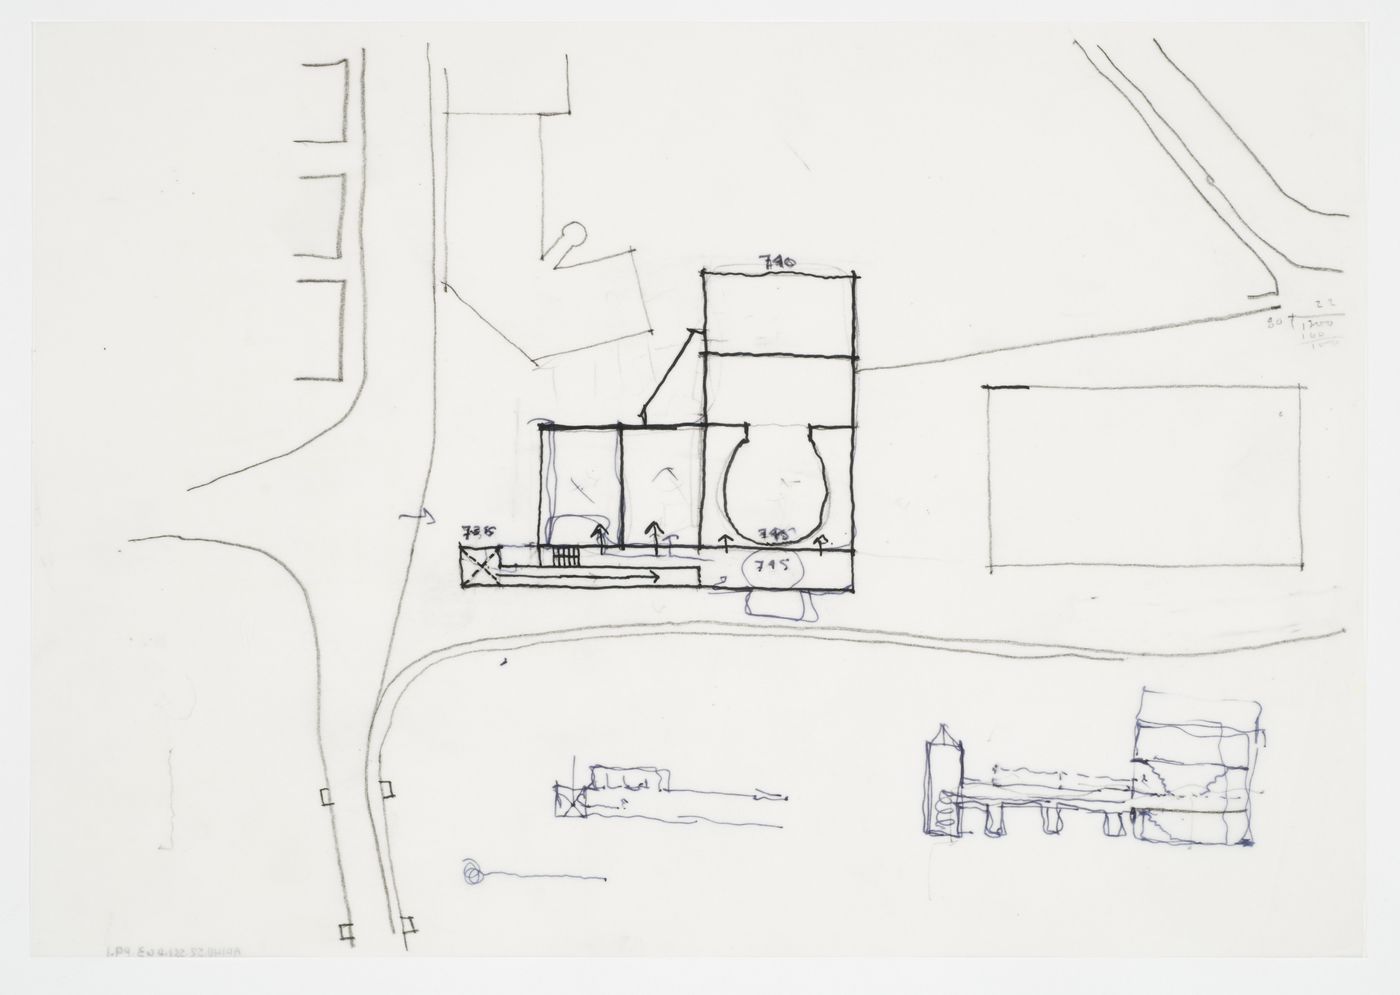 Center for Theatre Arts, Cornell University, Ithaca, New York: site plan and section